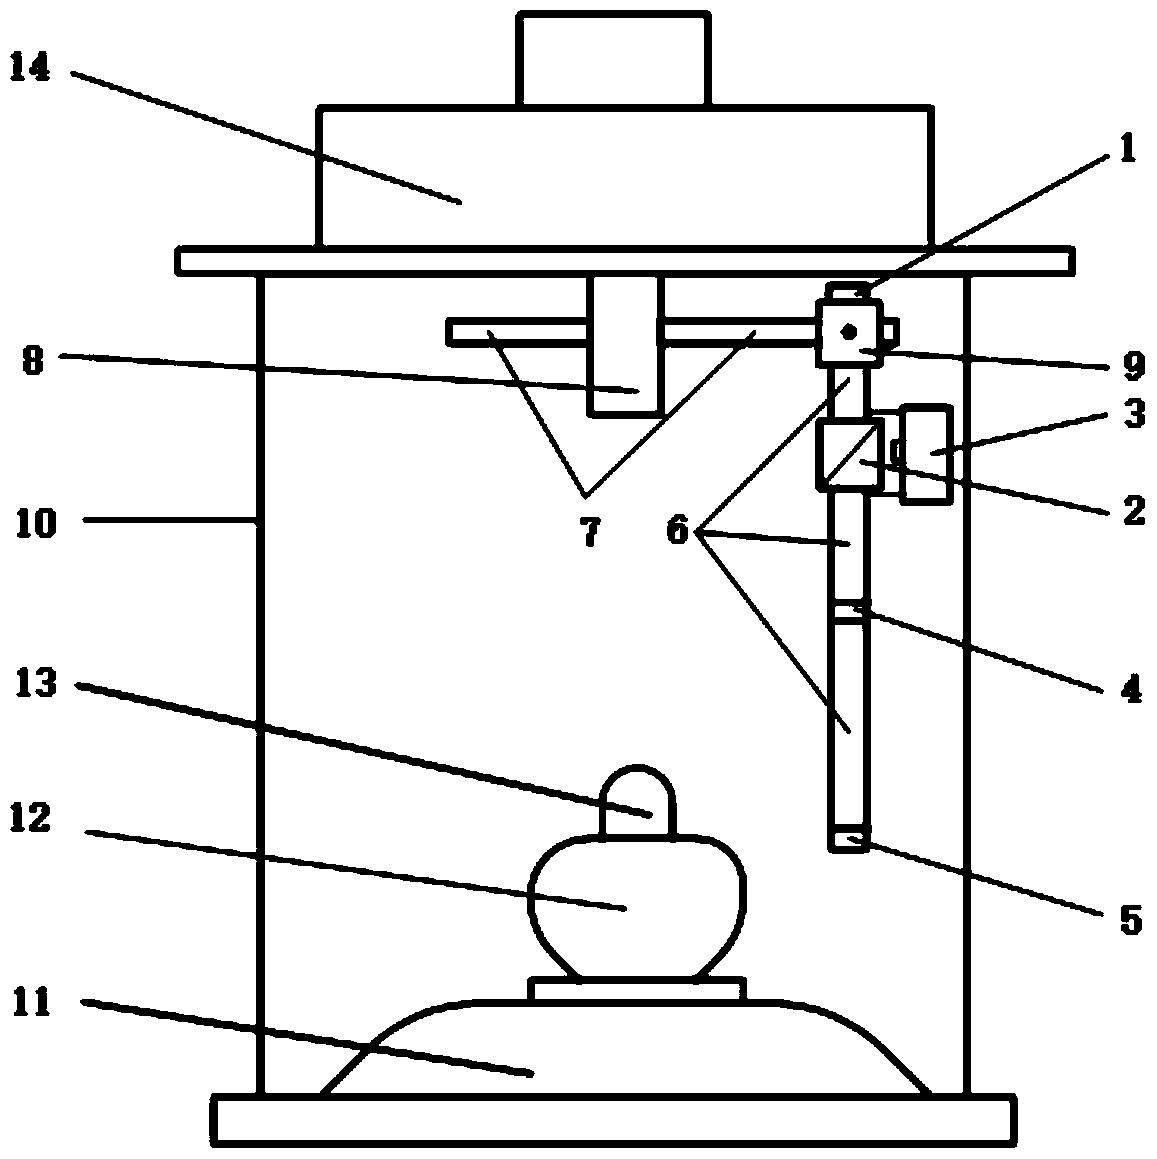 Device for measuring surface charge on insulators of DC gas-insulated metal-enclosed transmission lines